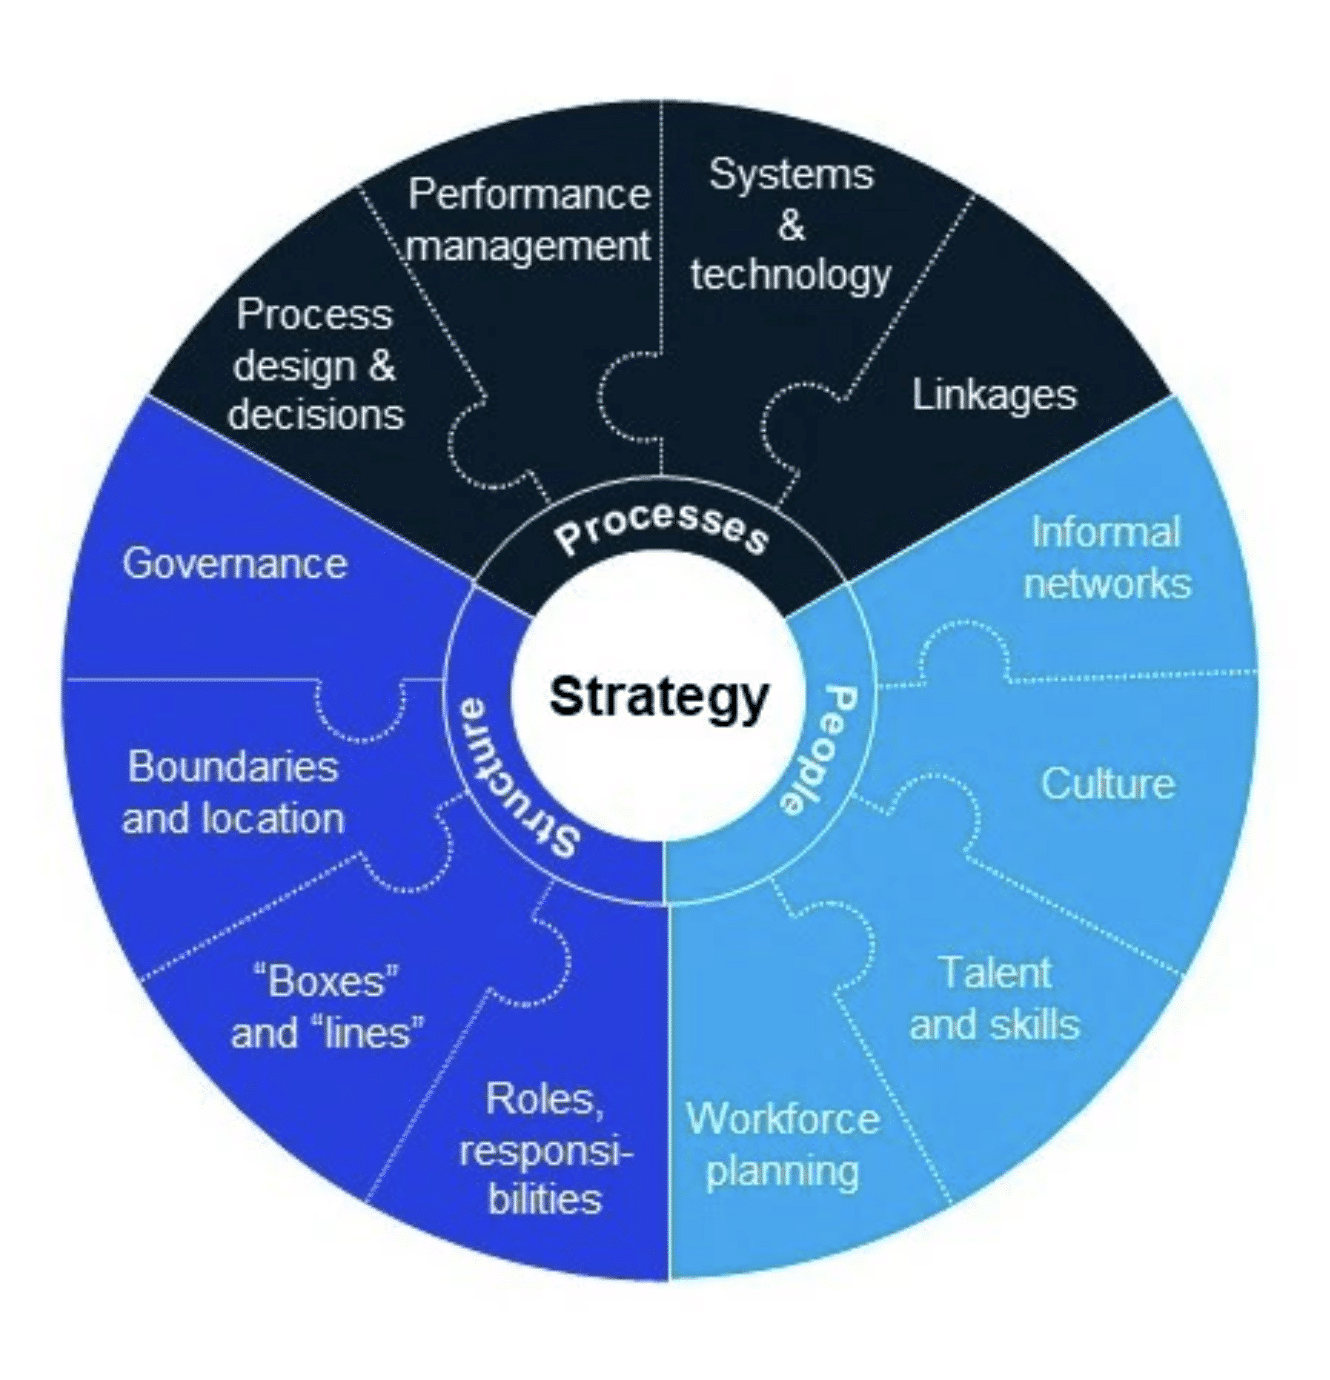 graphic outlines McKinsey’s the key components of processes, people, and structure for effective operations